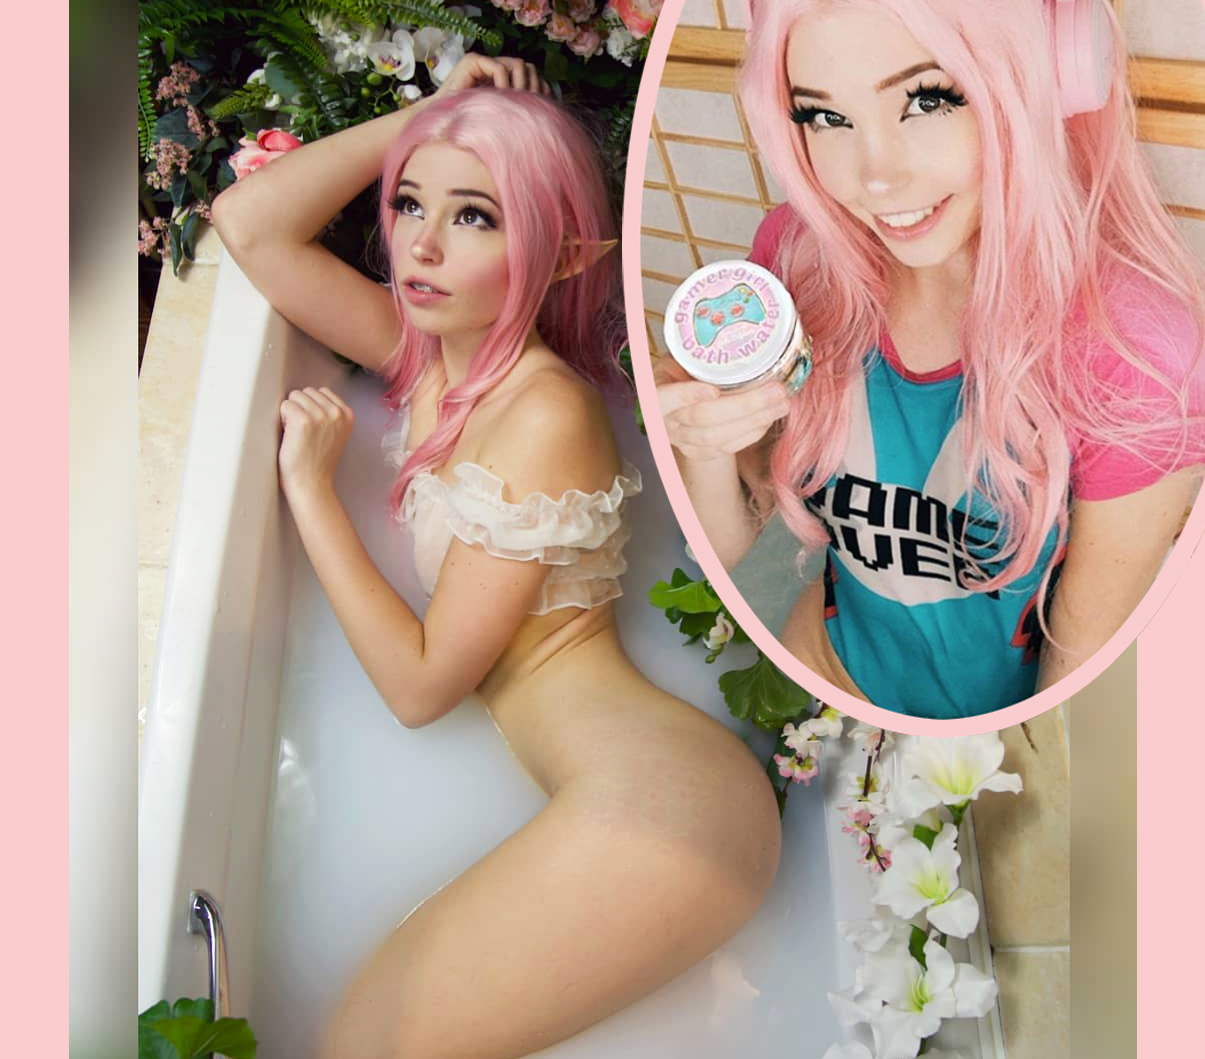 This tweet was shared by a Daily Mail parody account about Belle Delphine's  bath water